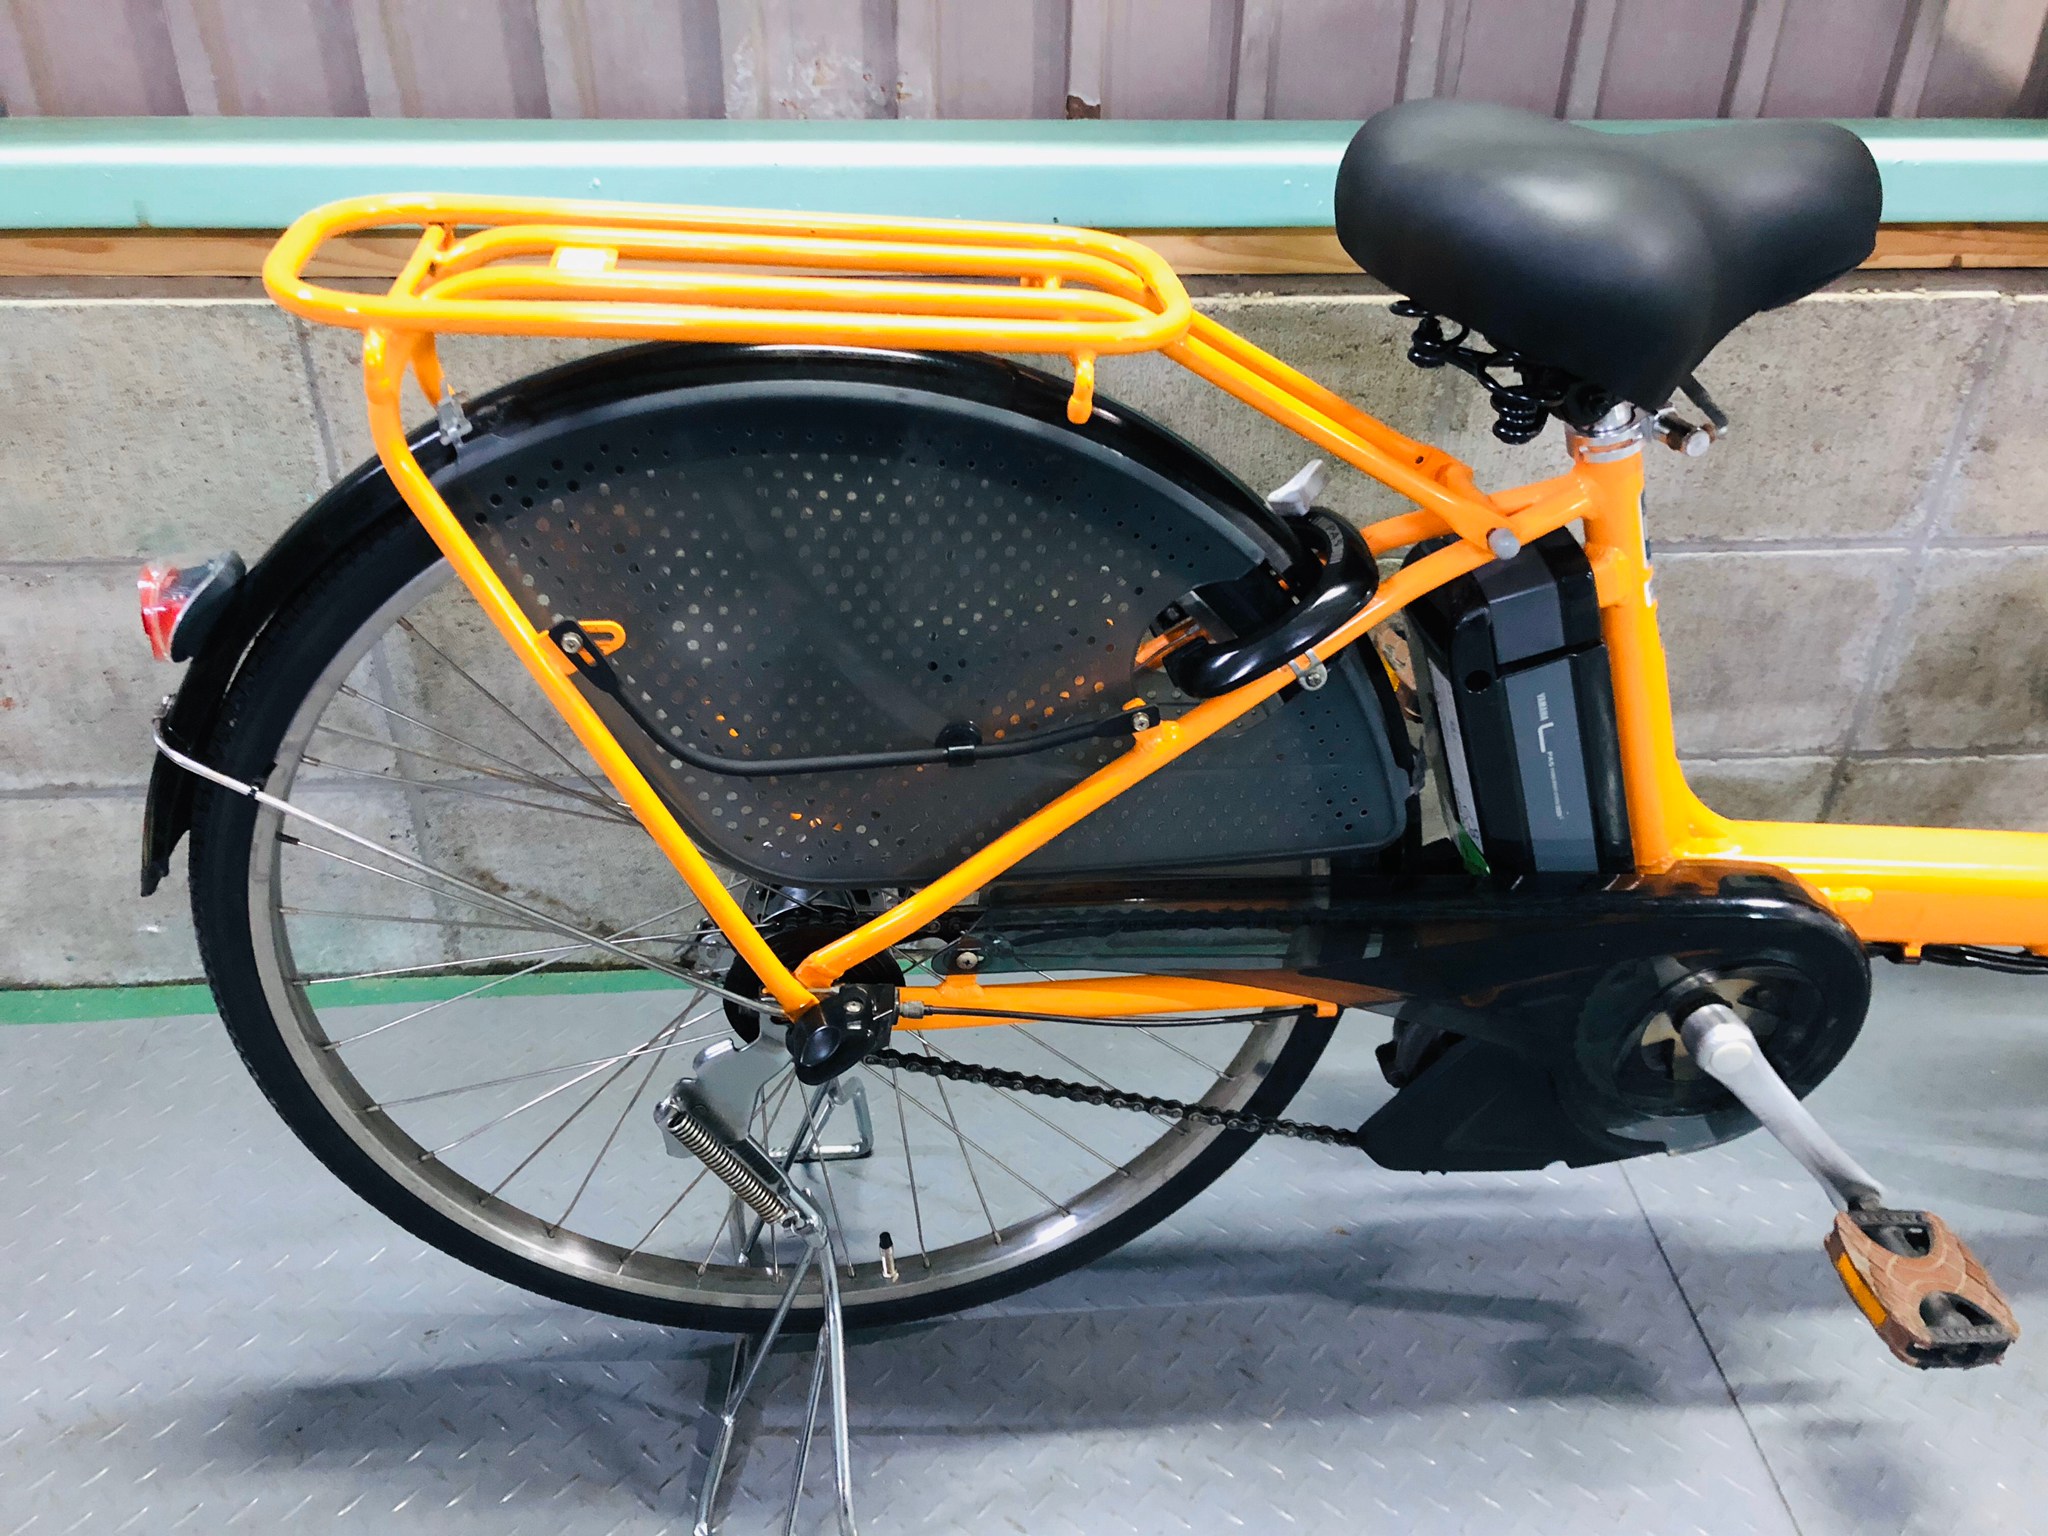 【SOLD OUT】電動自転車 ヤマハ リトルモア 22/26インチ 大容量8.9Ah イエロー | 国産・中古の激安電動アシスト自転車を販売